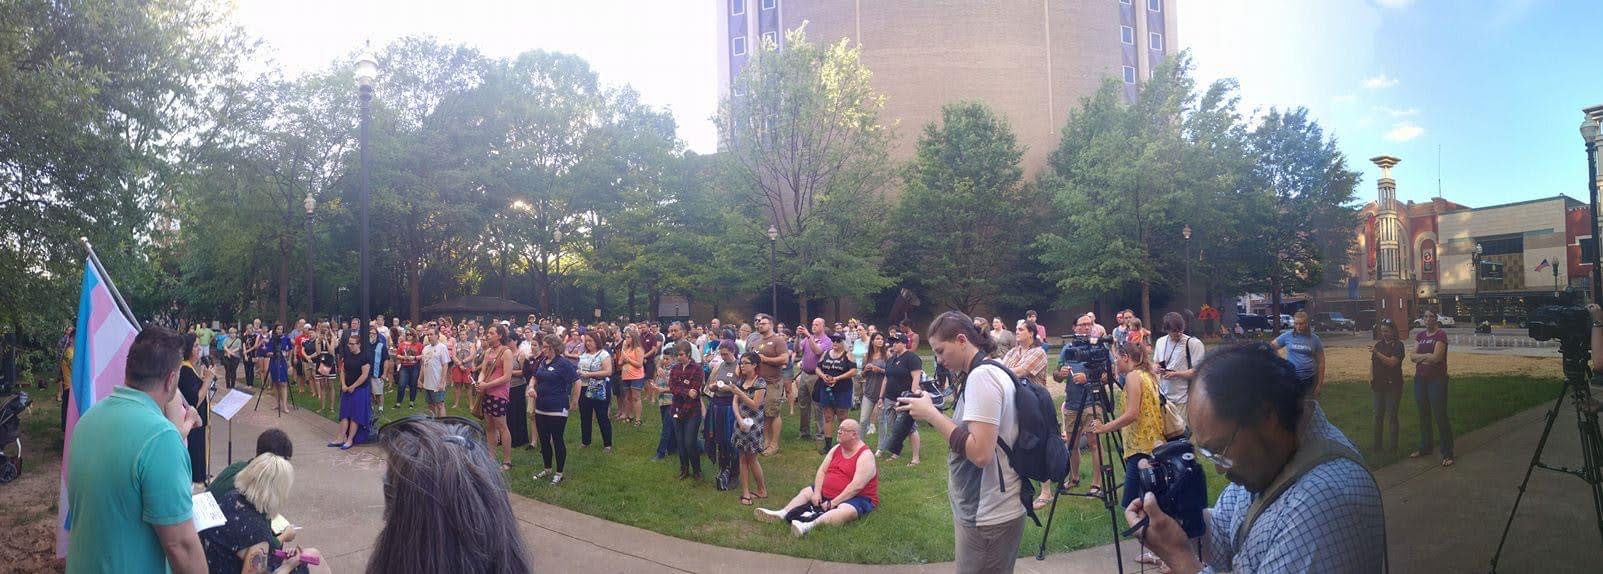 Participants in Knoxville, TN attend and watch a rally hosted by TEP in 2017